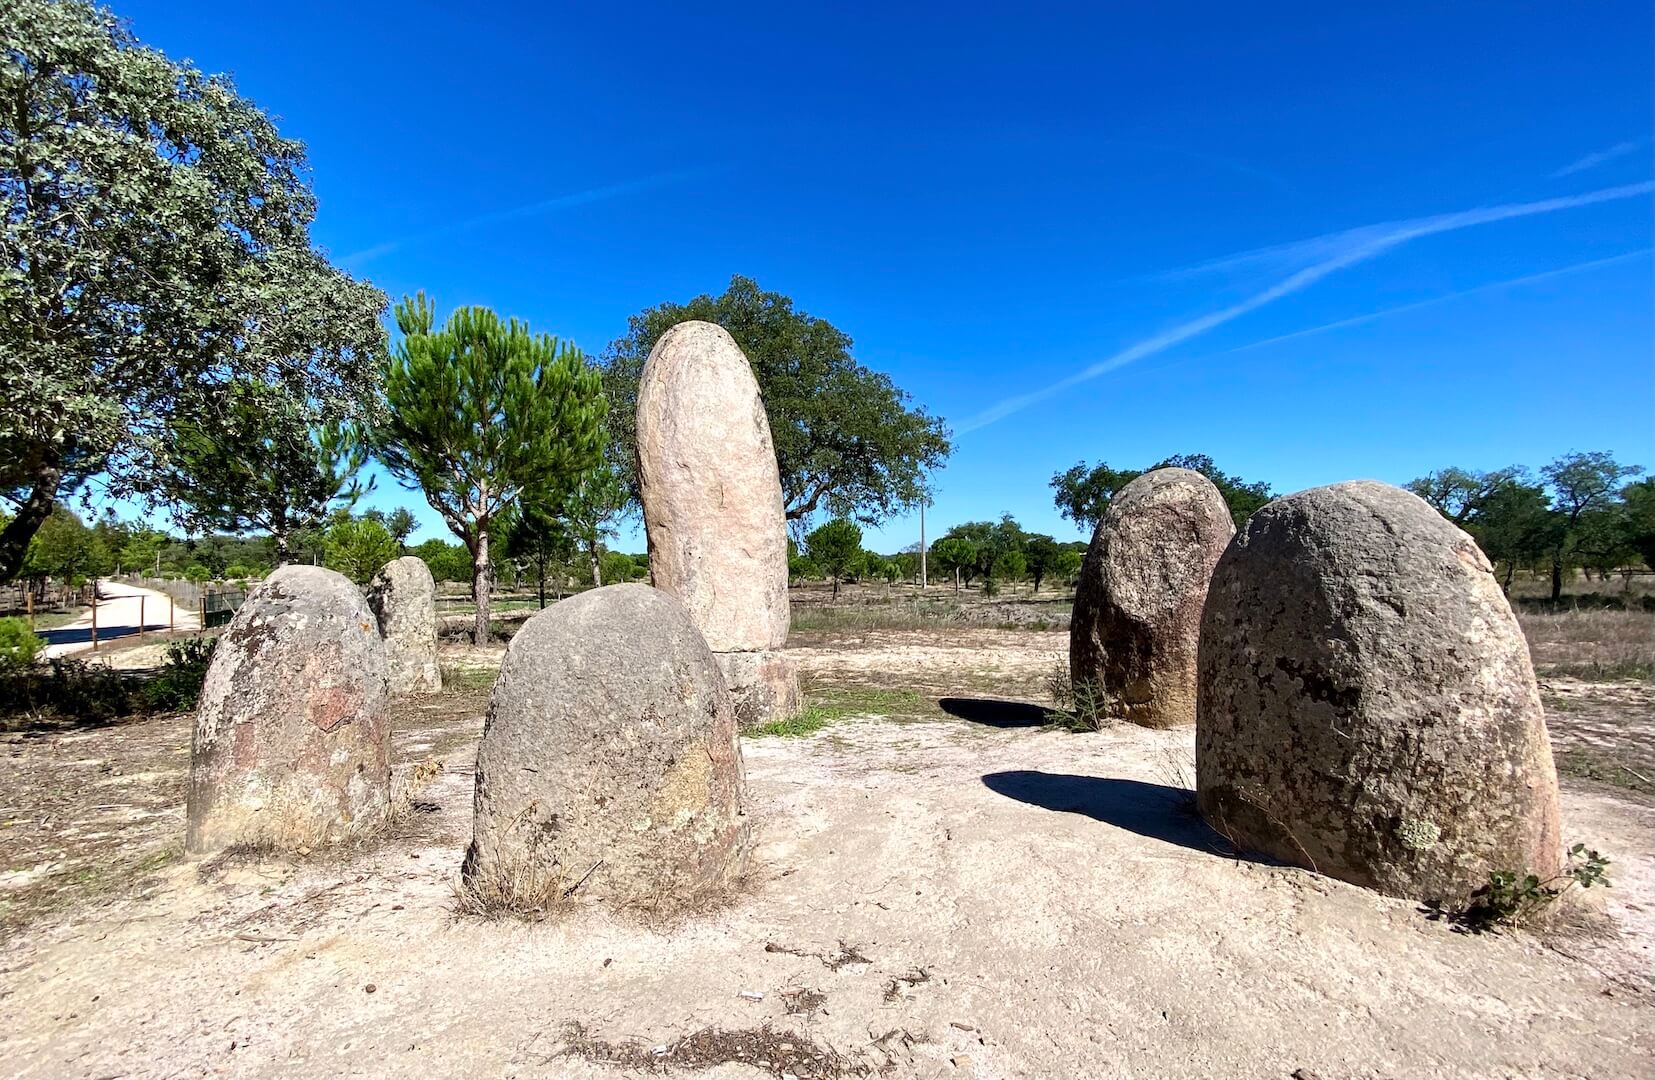 Seeing megalith structures, older than Stonehenge (5,500-4,500 BC) near Évora